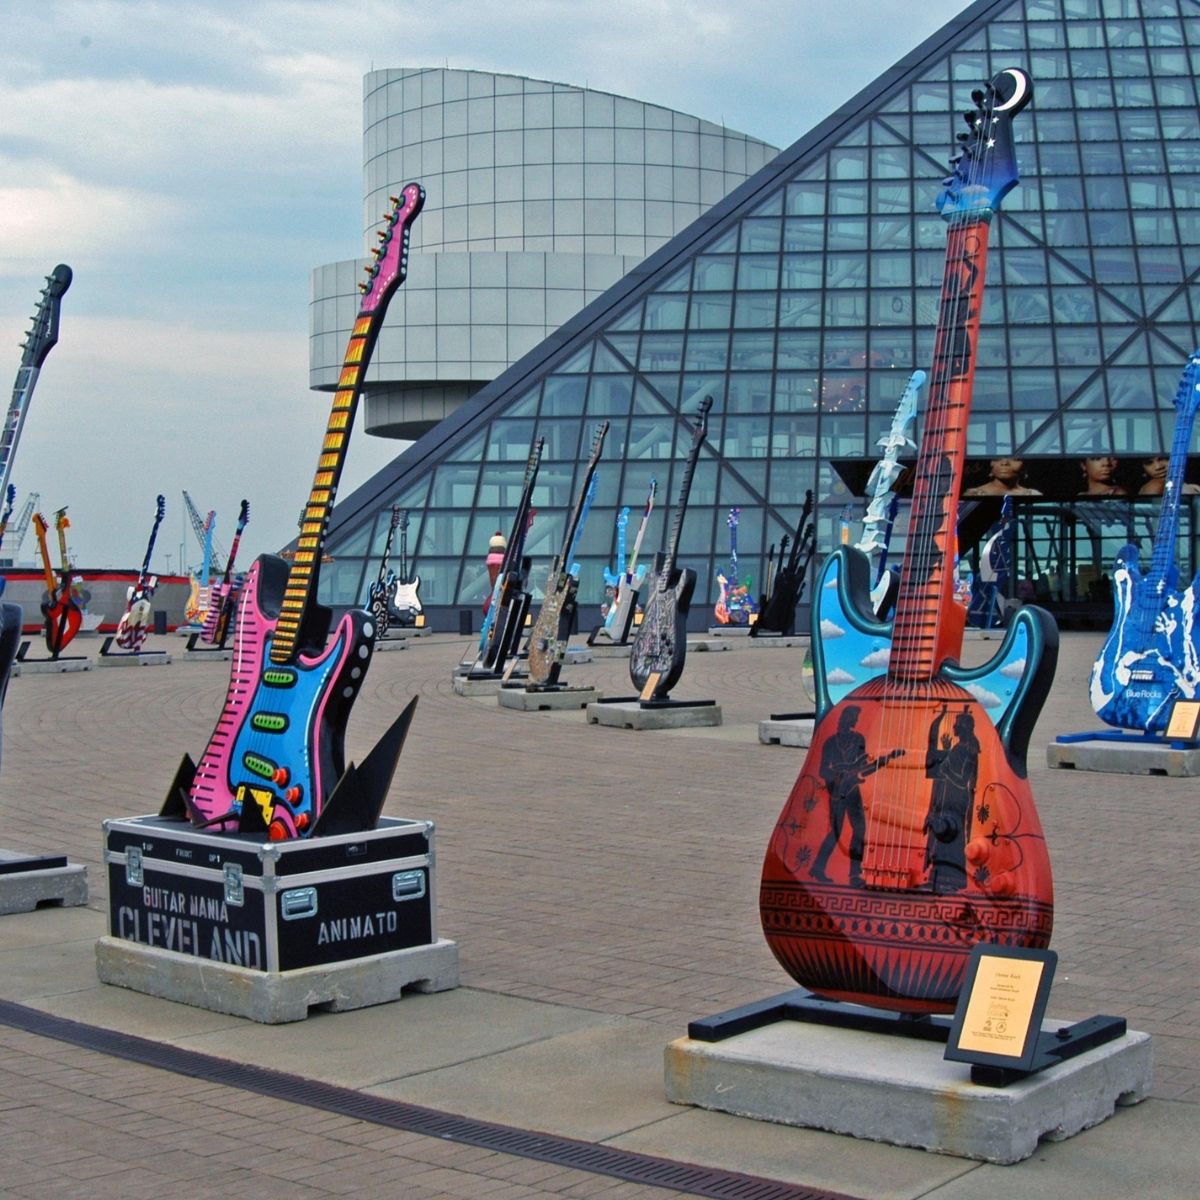 Rock and Roll Hall of Fame outside